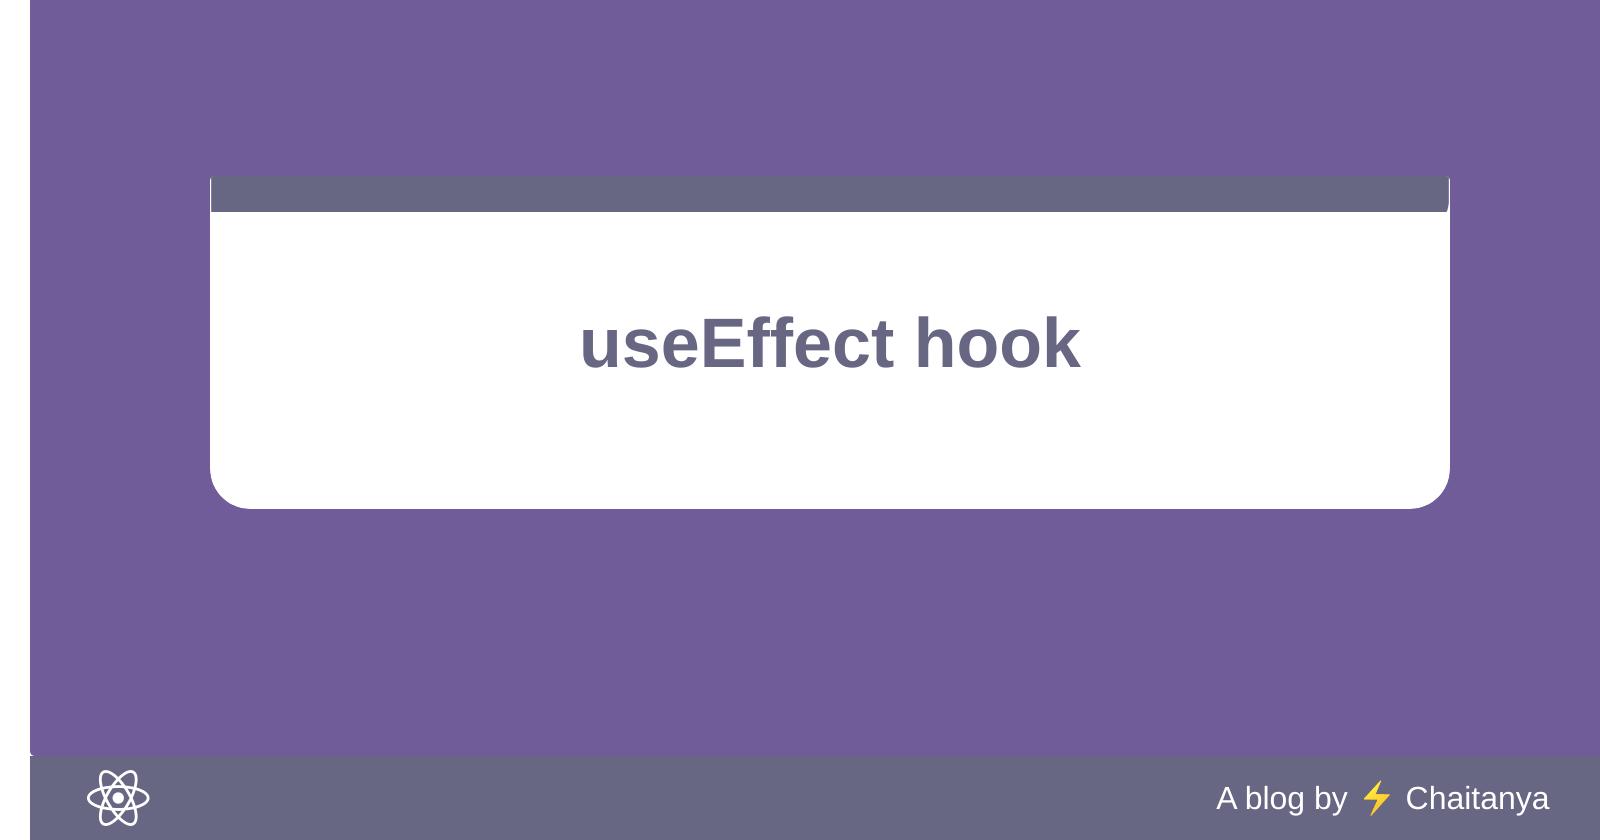 useEffect is the hook you would need for handling side effects